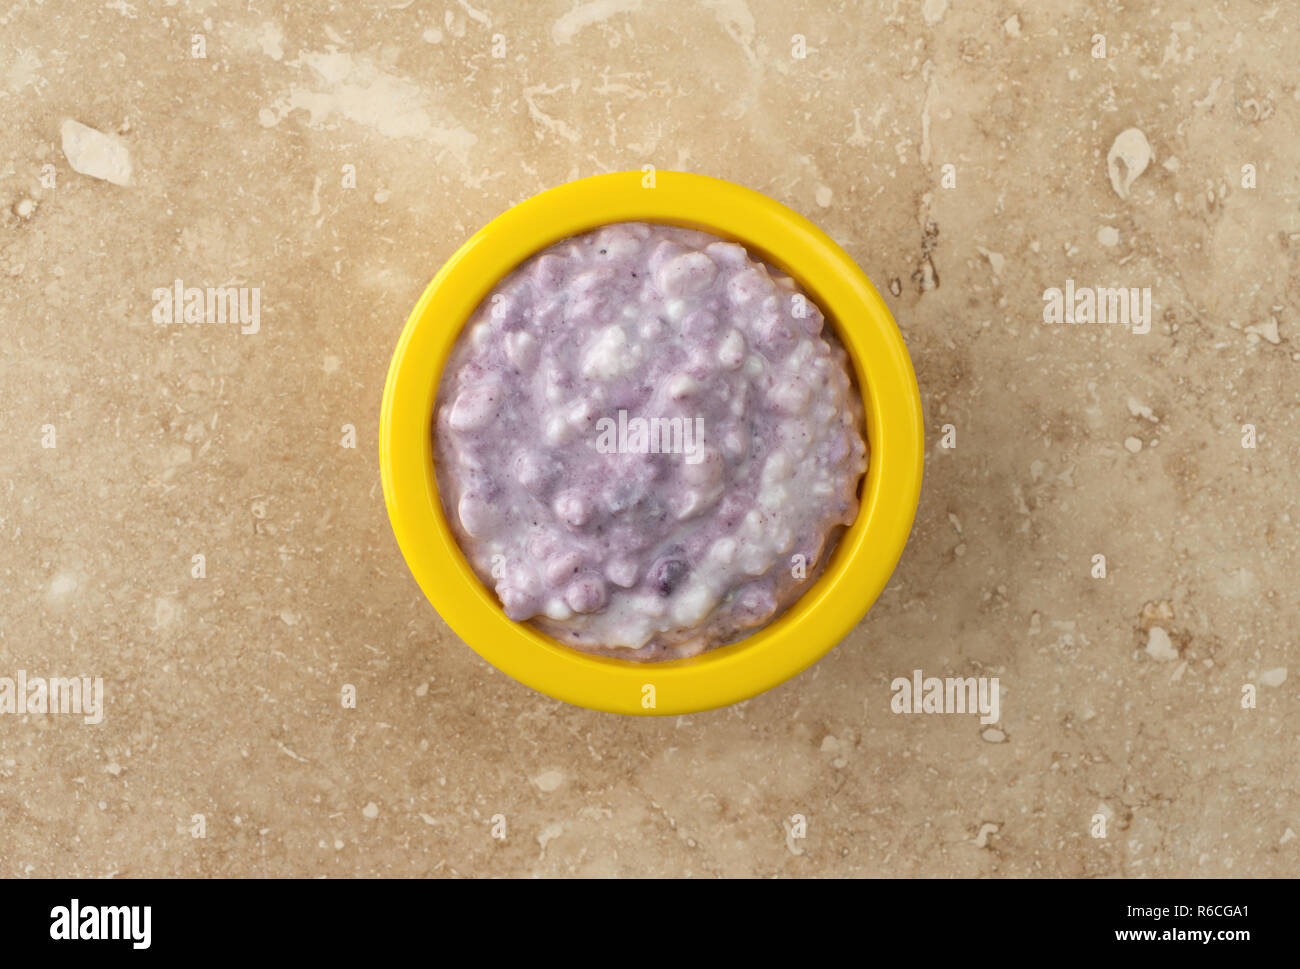 Top view of a small bright yellow bowl filled with blueberries and cottage cheese on a beige mottled tile. Stock Photo